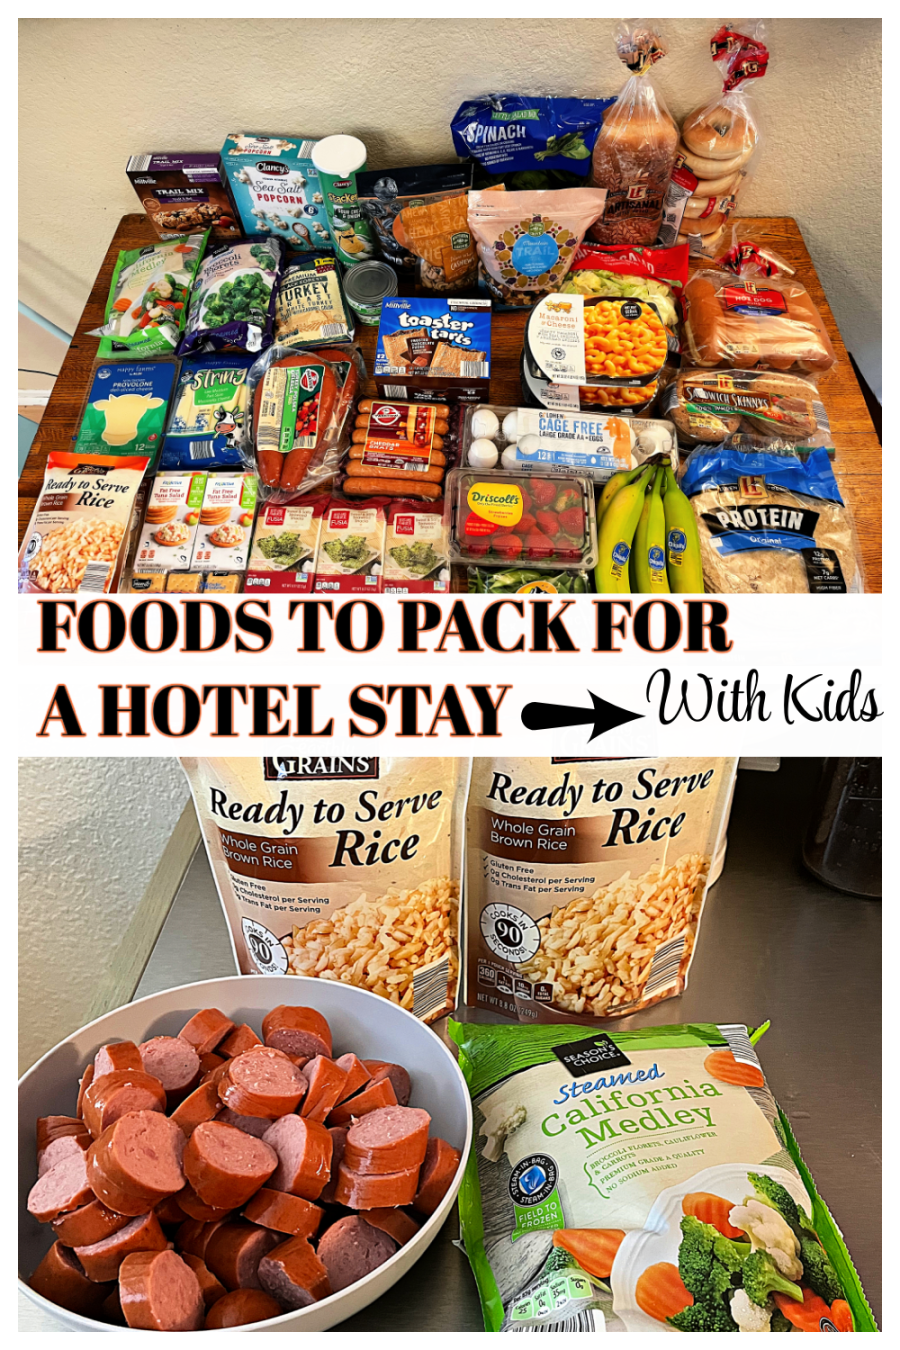 Foods to Pack for Hotel Stay - A Bountiful Love